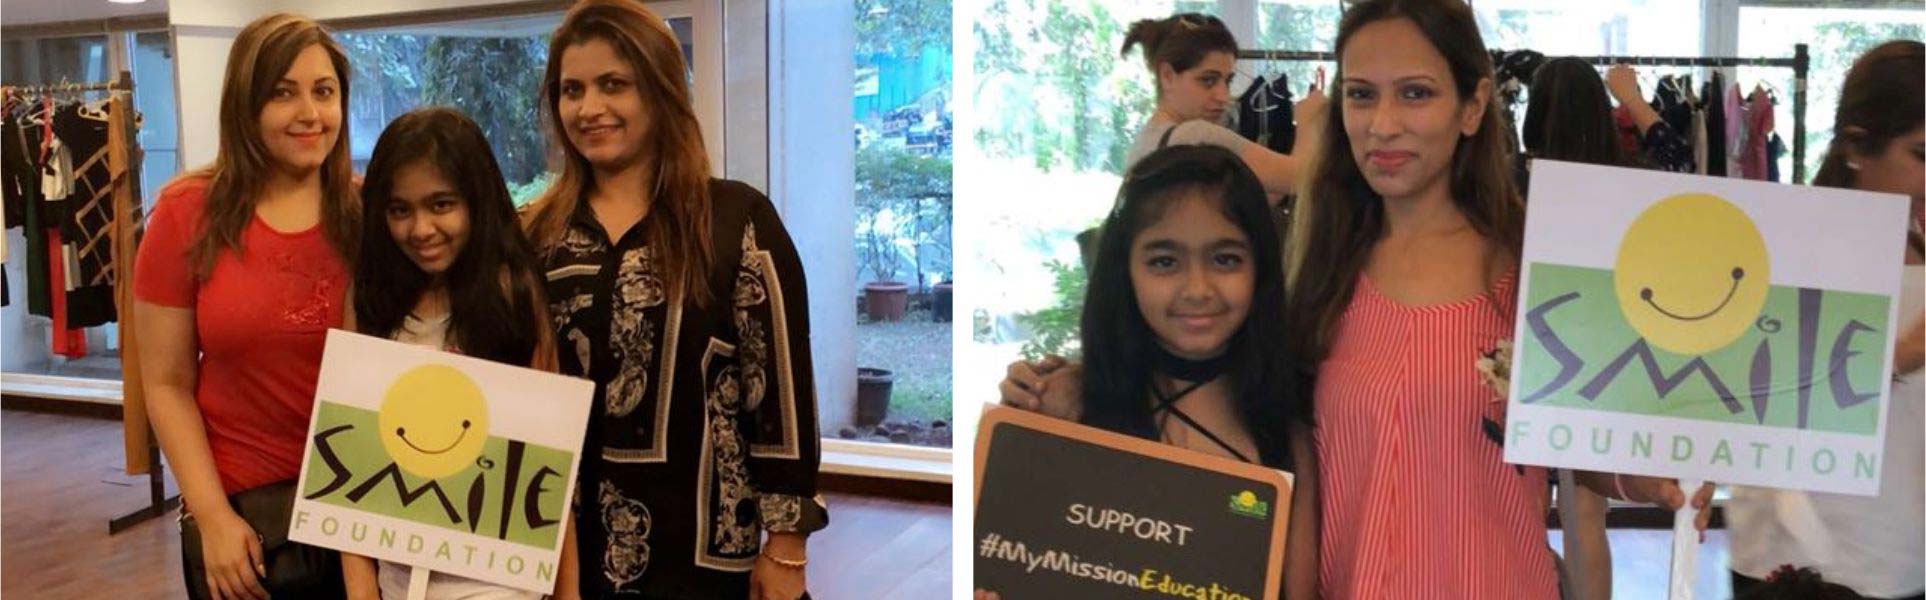 11 year old fashion designer supports Mission Education programme of Smile Foundation